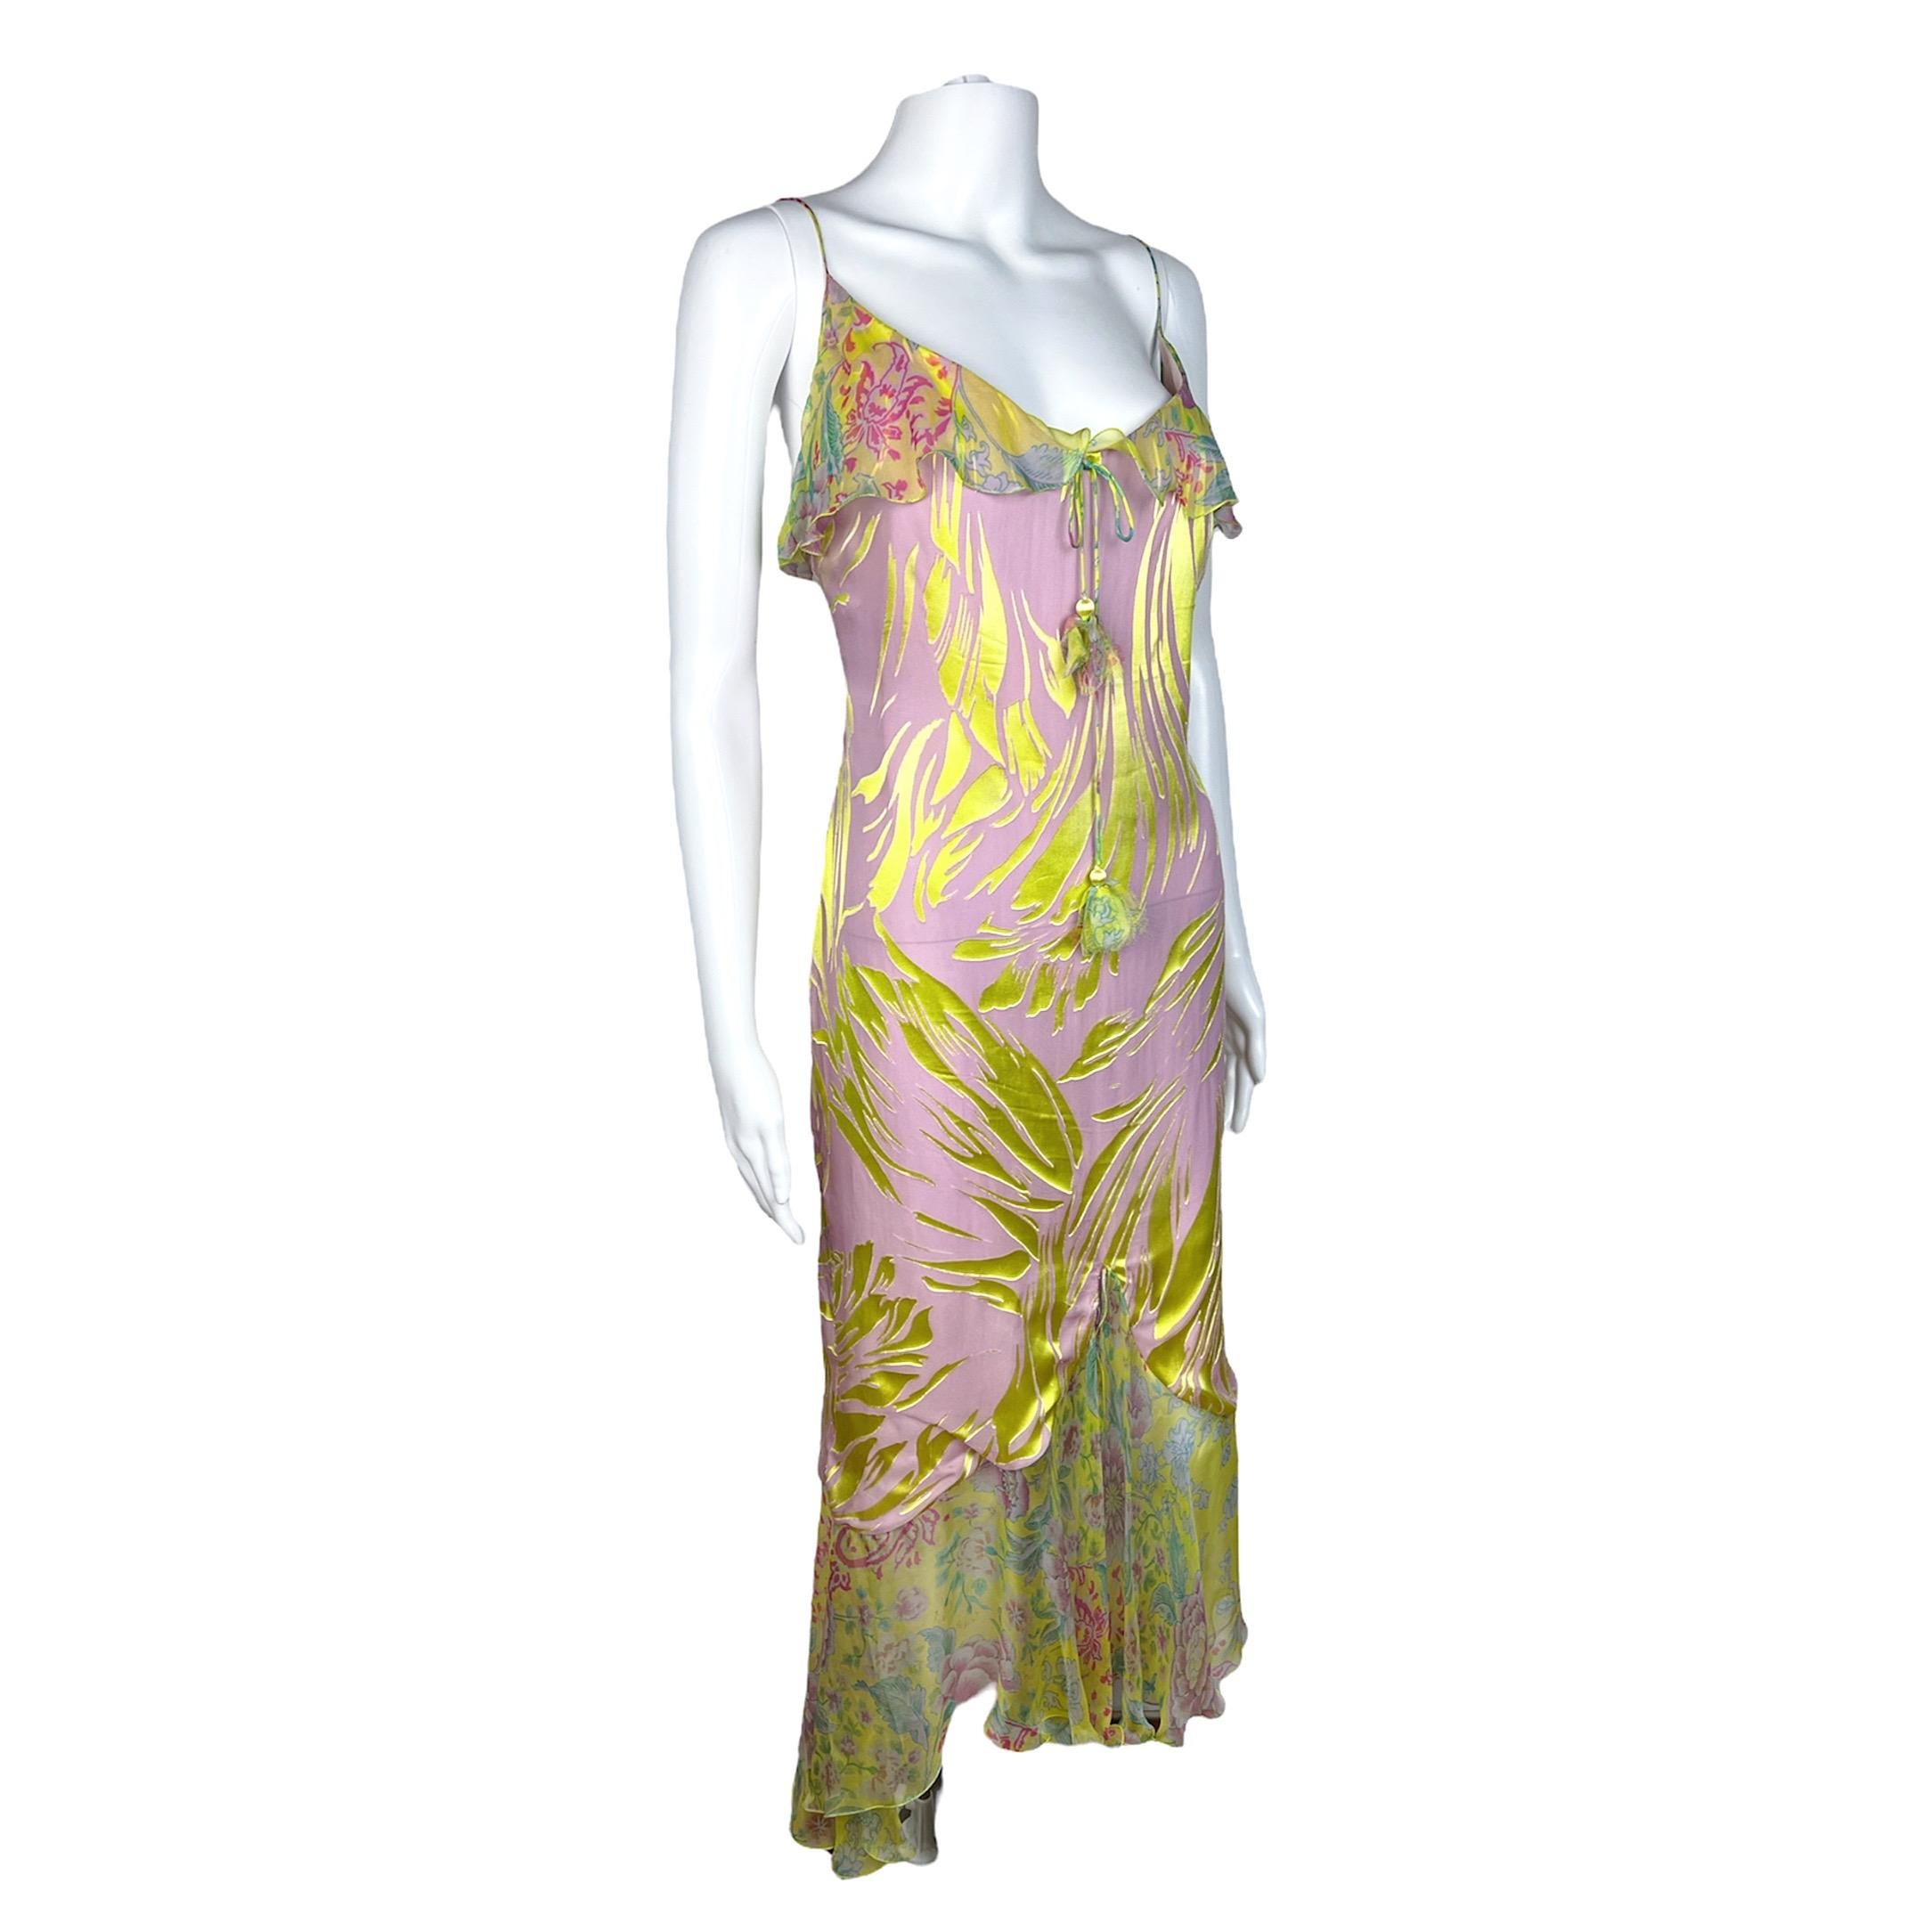 Lovely 2000’s Emanuel Ungaro summer dress with super cute tassels and ruffle in floral prints with spaghetti straps. The dress has a slit at the bottom in the center that create a gorgeous movement when walking. No size tag, make sure to report to